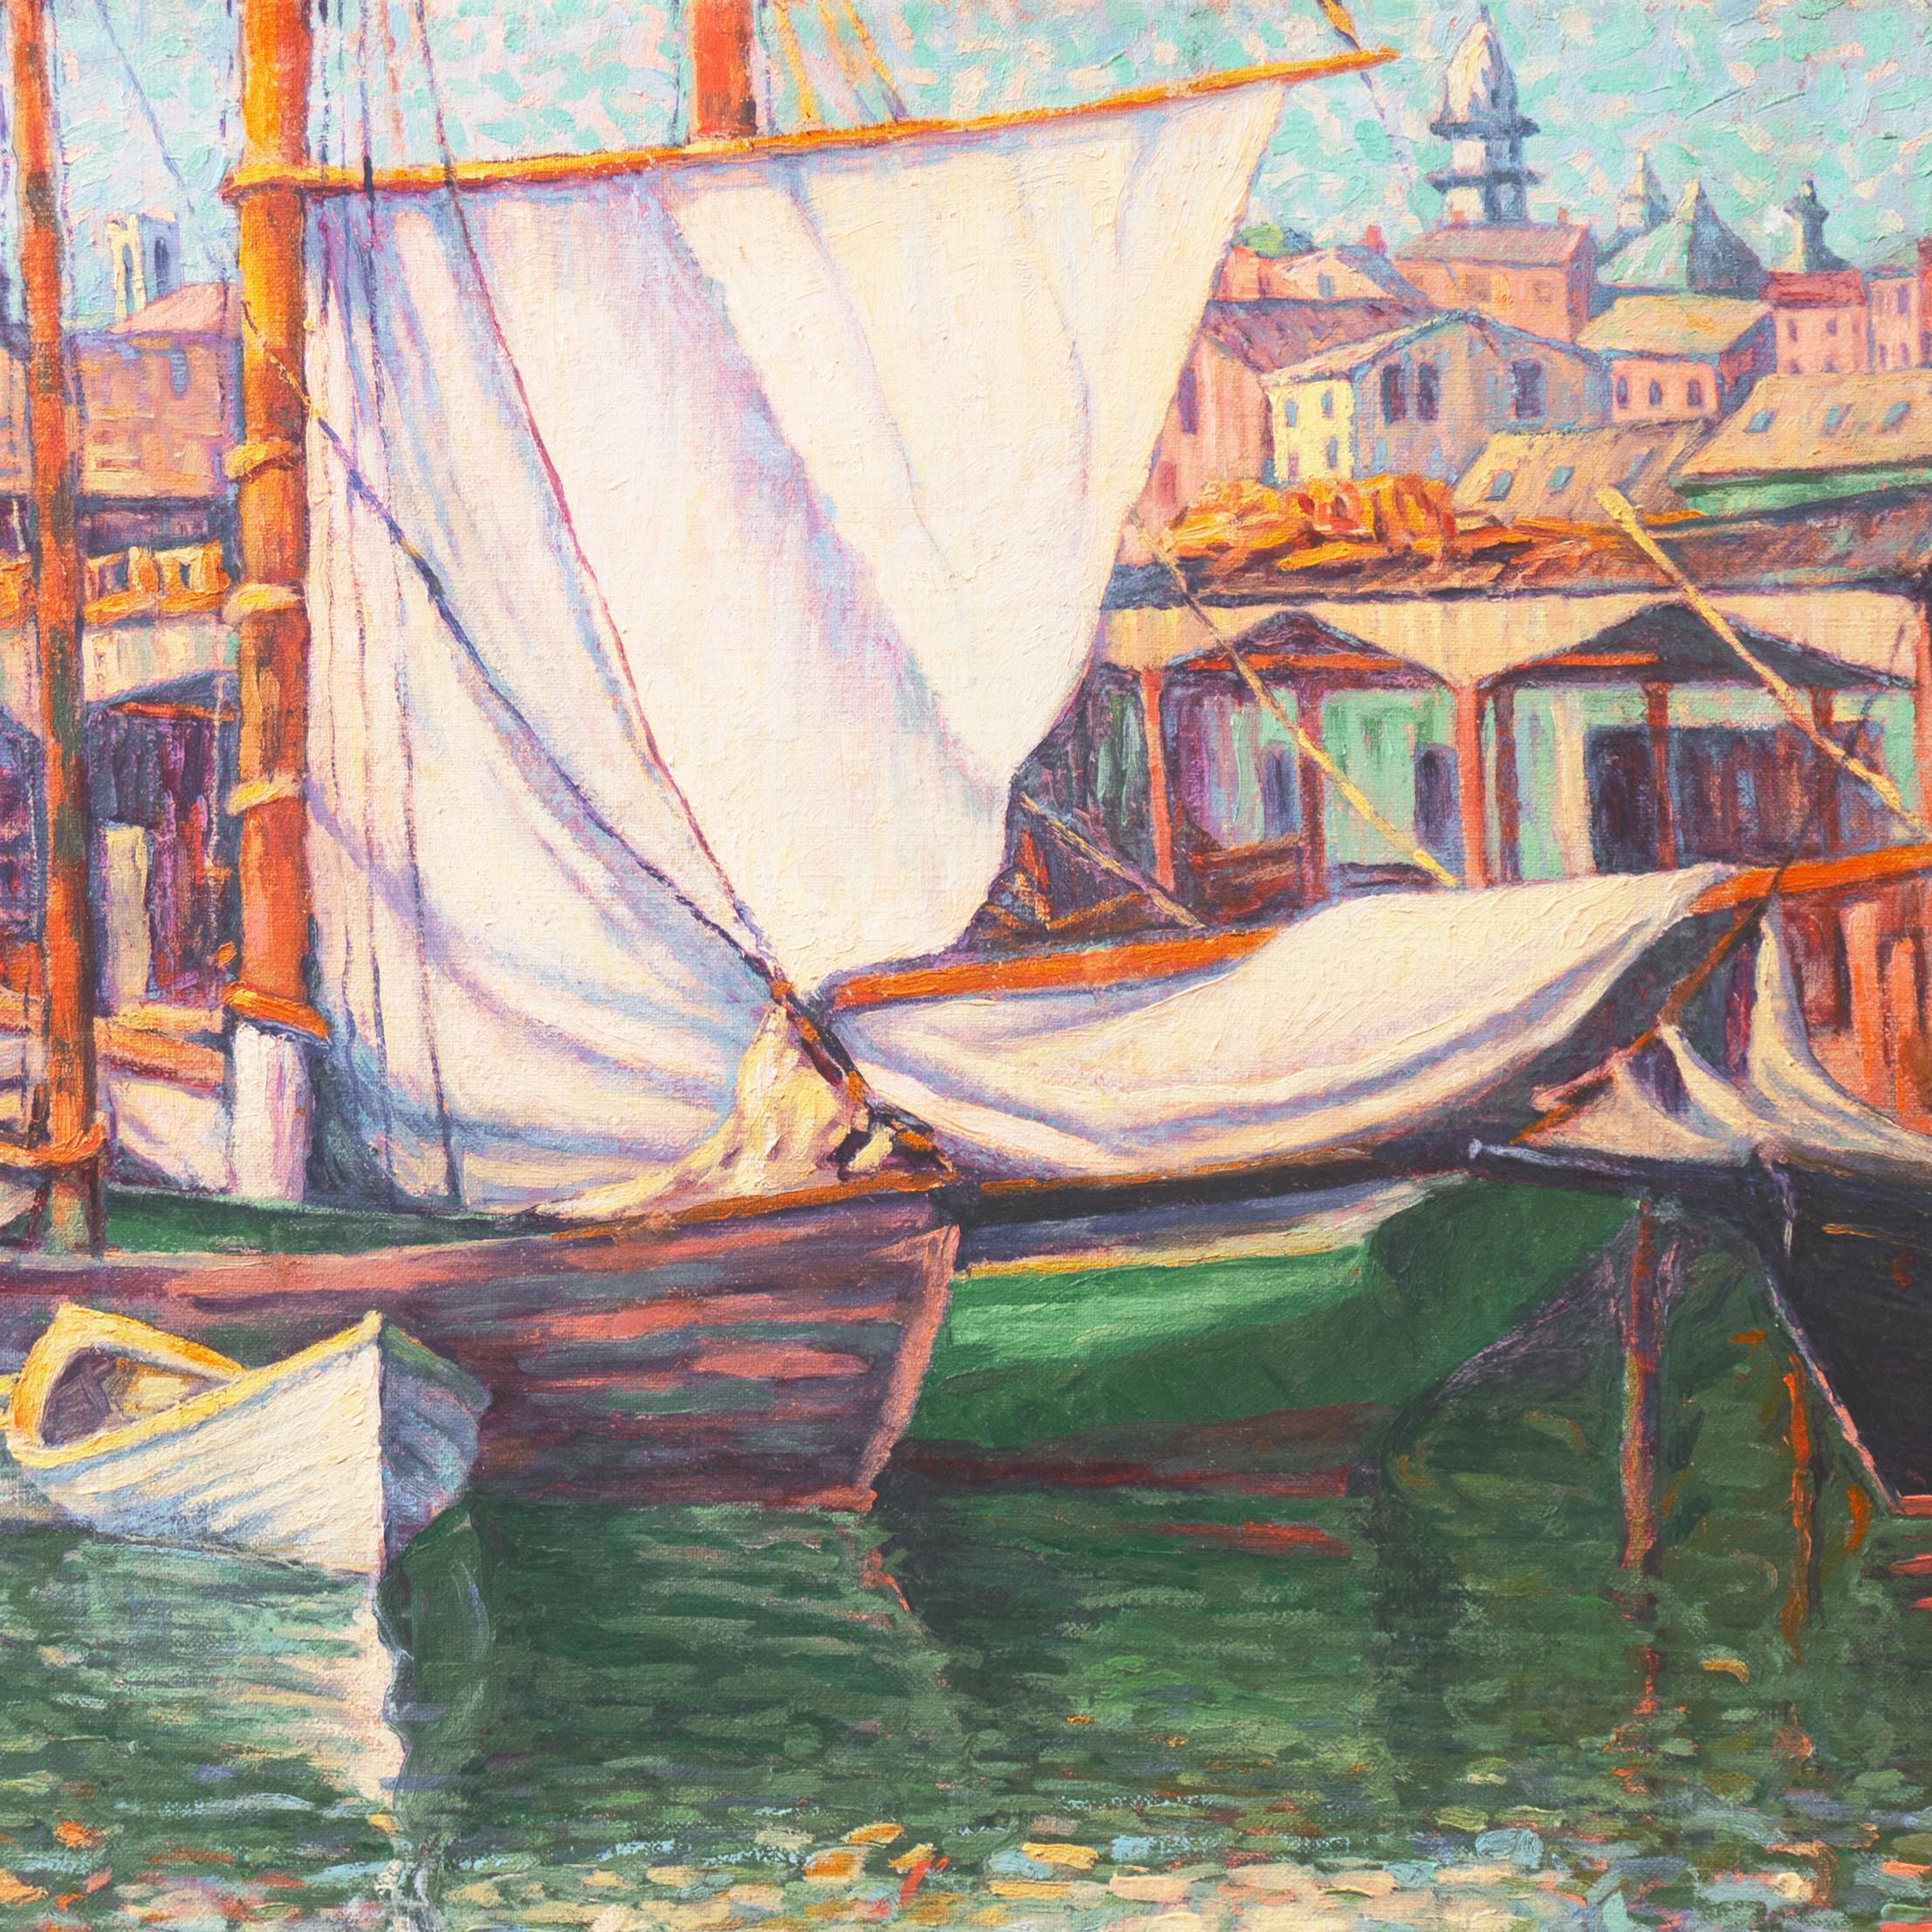 'Fishing Boats in Harbor', American School Oil, Oakland, San Francisco Bay Area - Post-Impressionist Painting by American School (20th century)